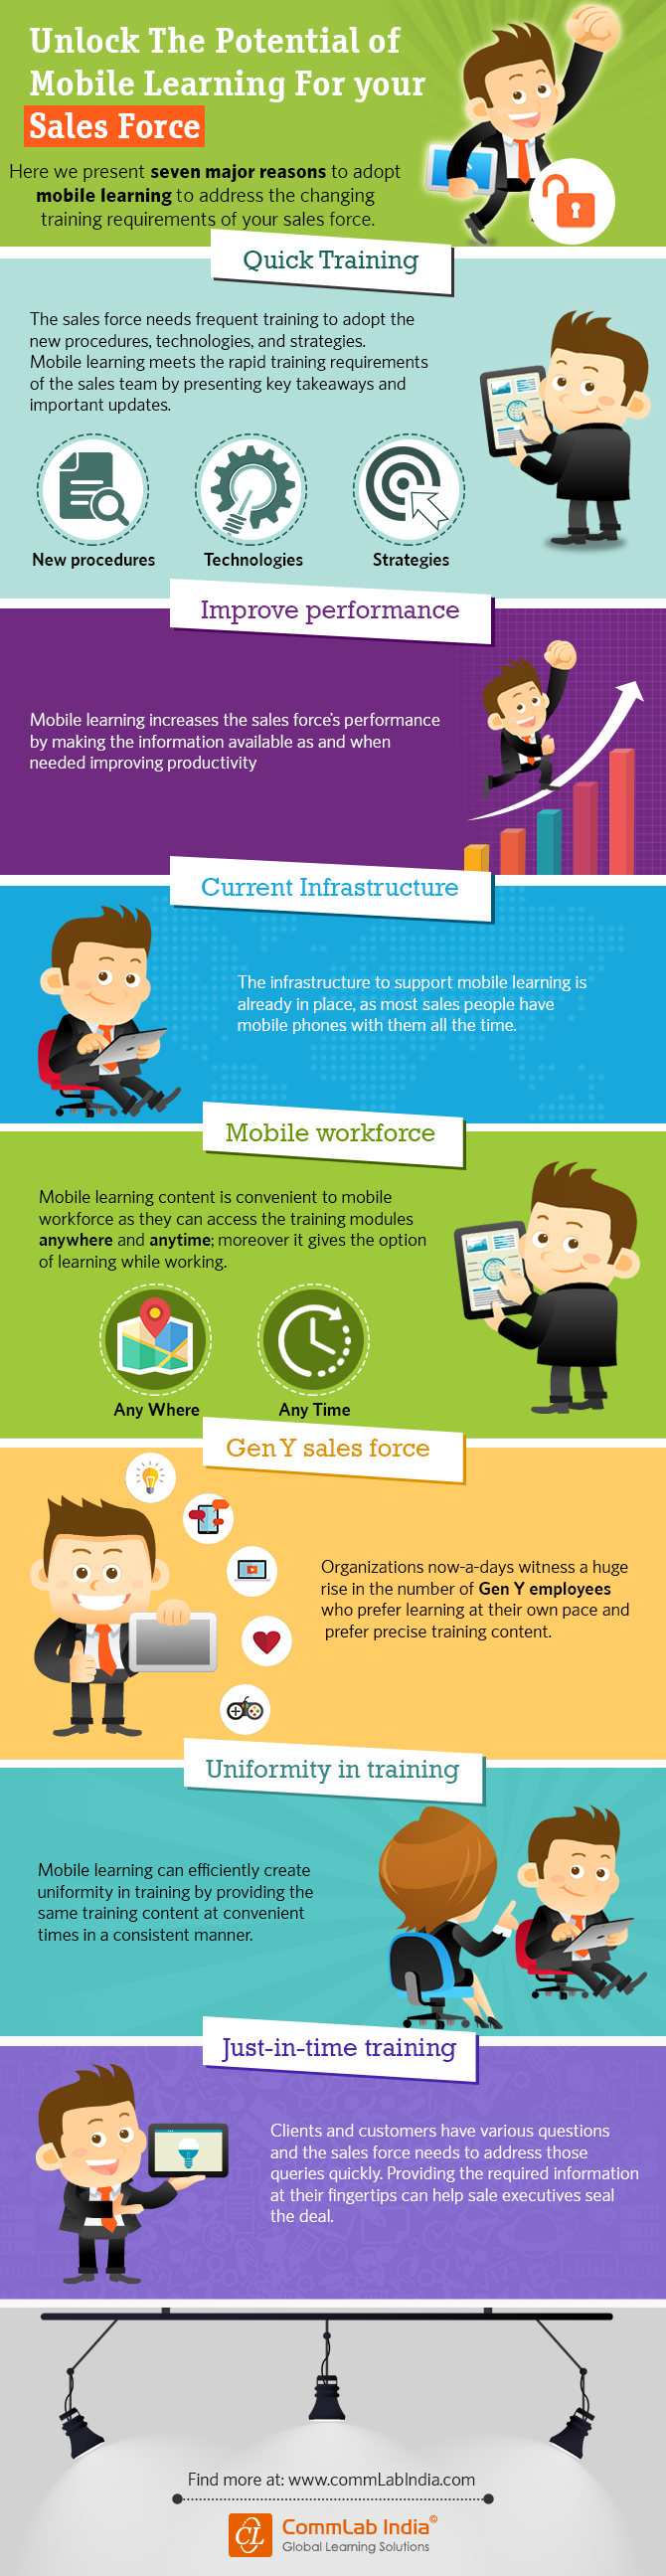 Unlock The Potential of Mobile Learning for Your Sales Force [Infographic]